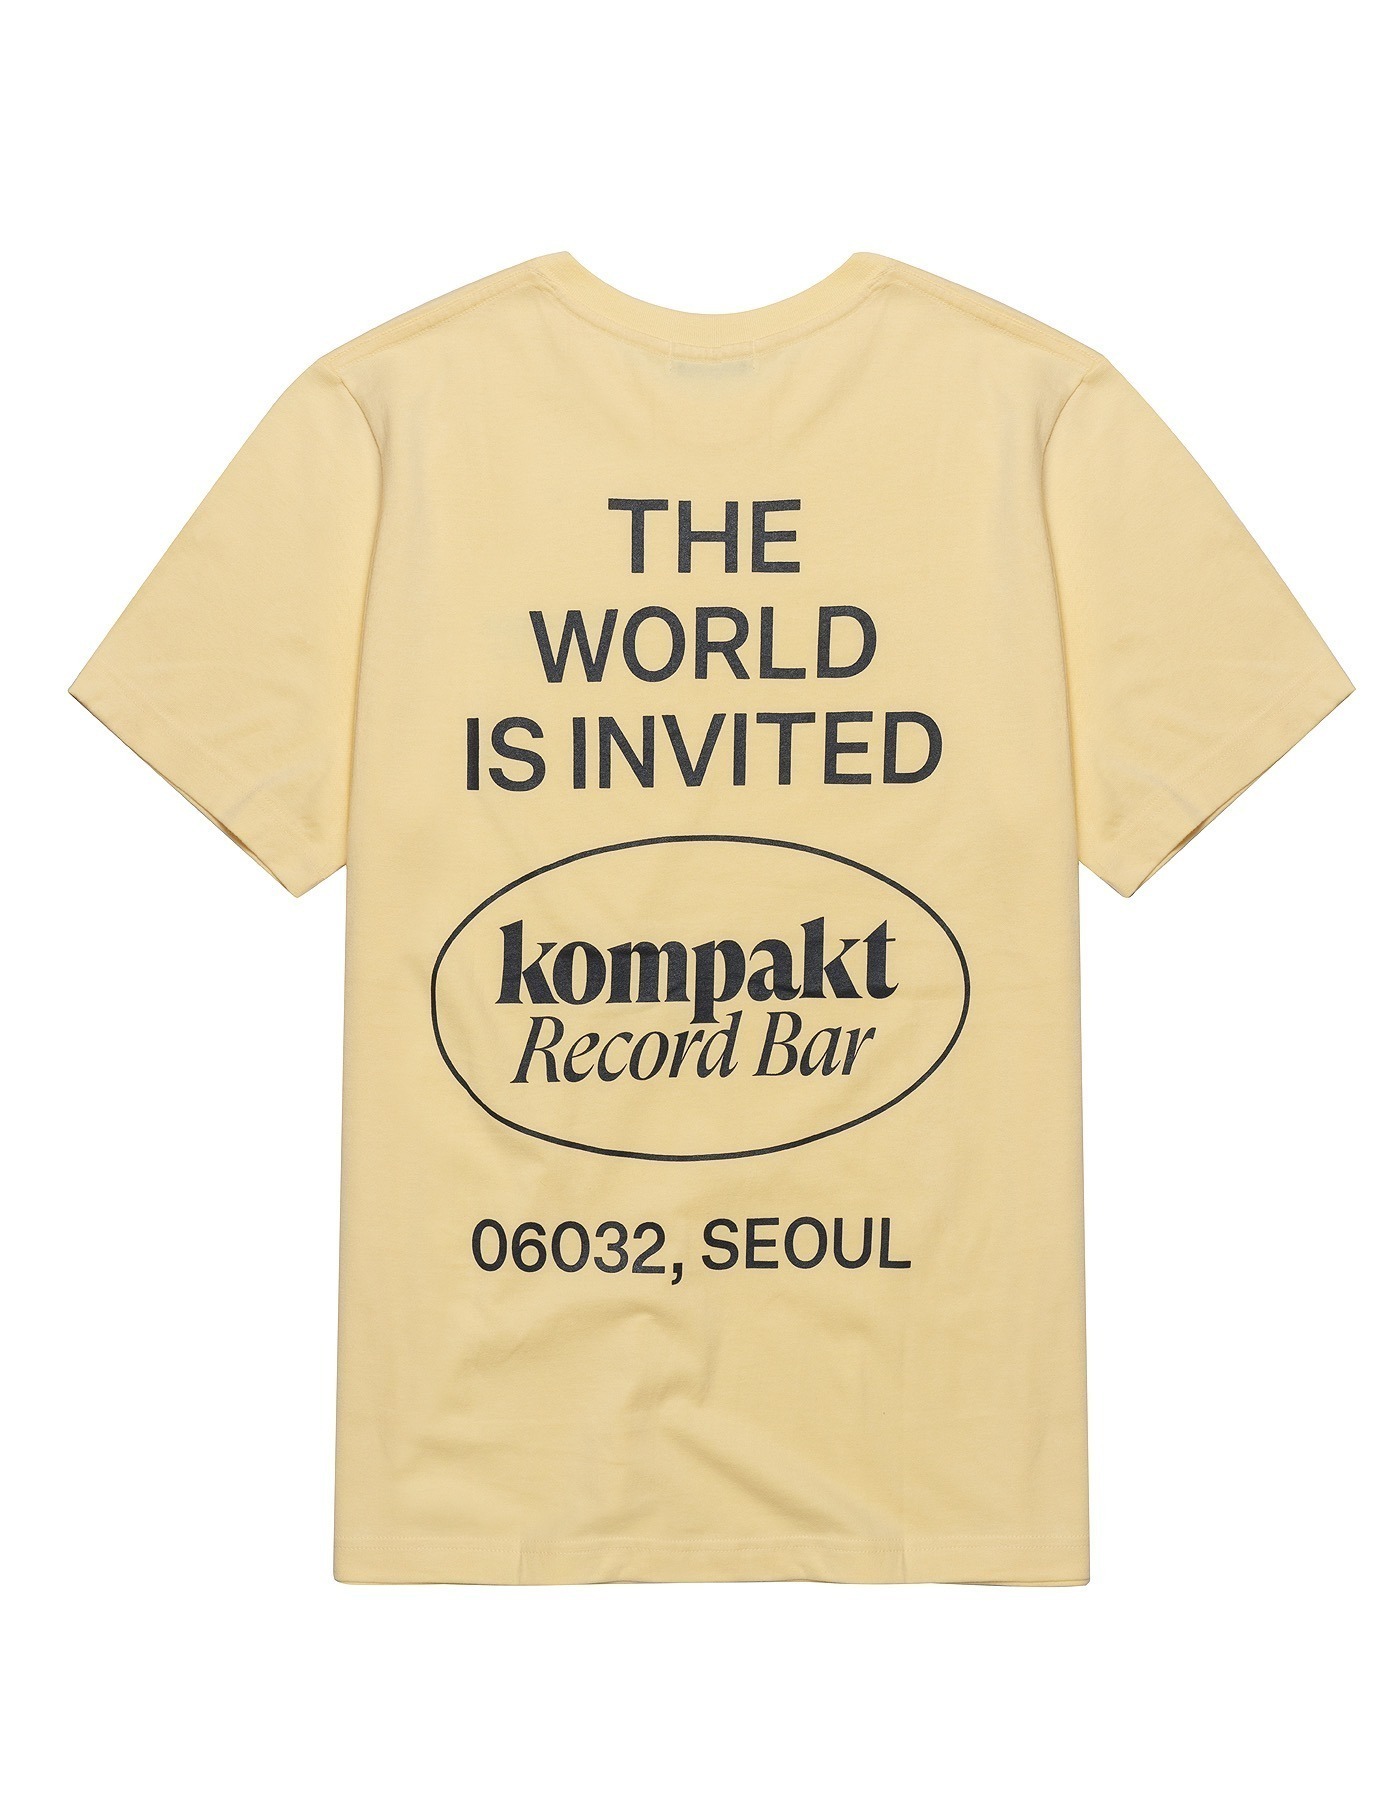 The World is Invited T-shirts - Yellow